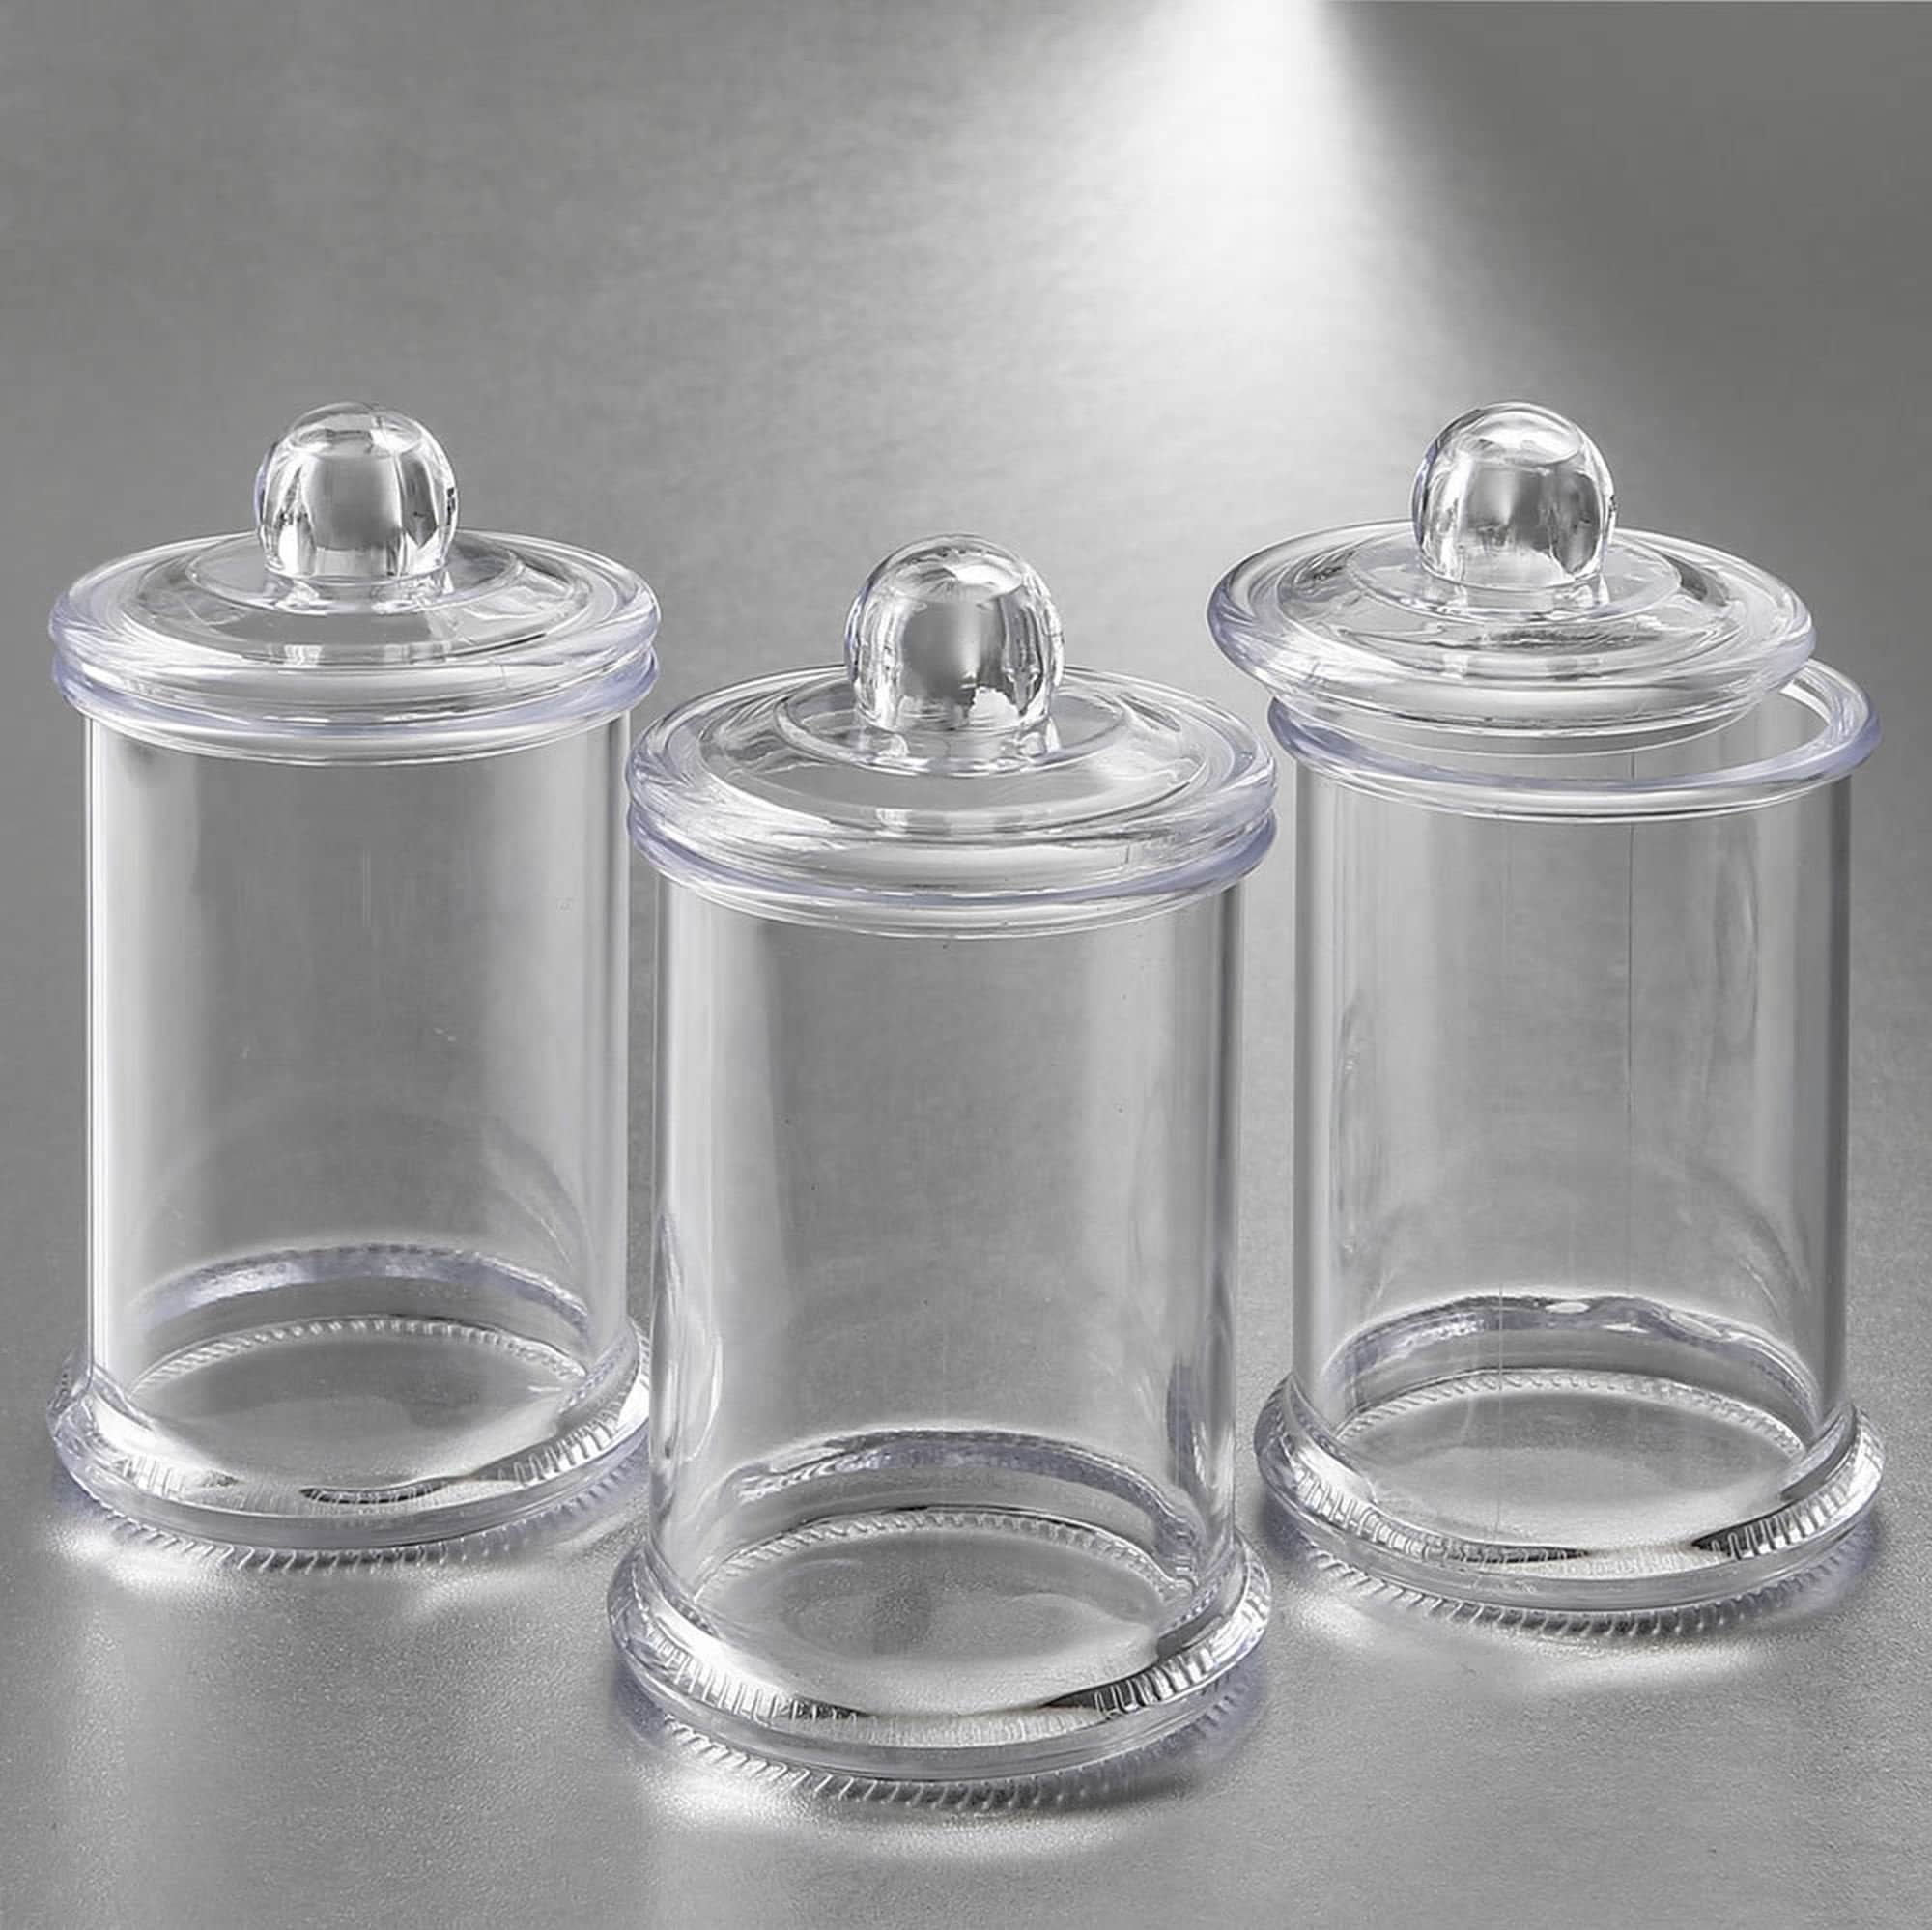 TOPZEA 12 Pack Glass Favor Jars with Airtight Lids, 8 oz Clear Glass Sugar  Spice Containers Candy Apothecary Jar, Decorative Candle Holder Kitchen